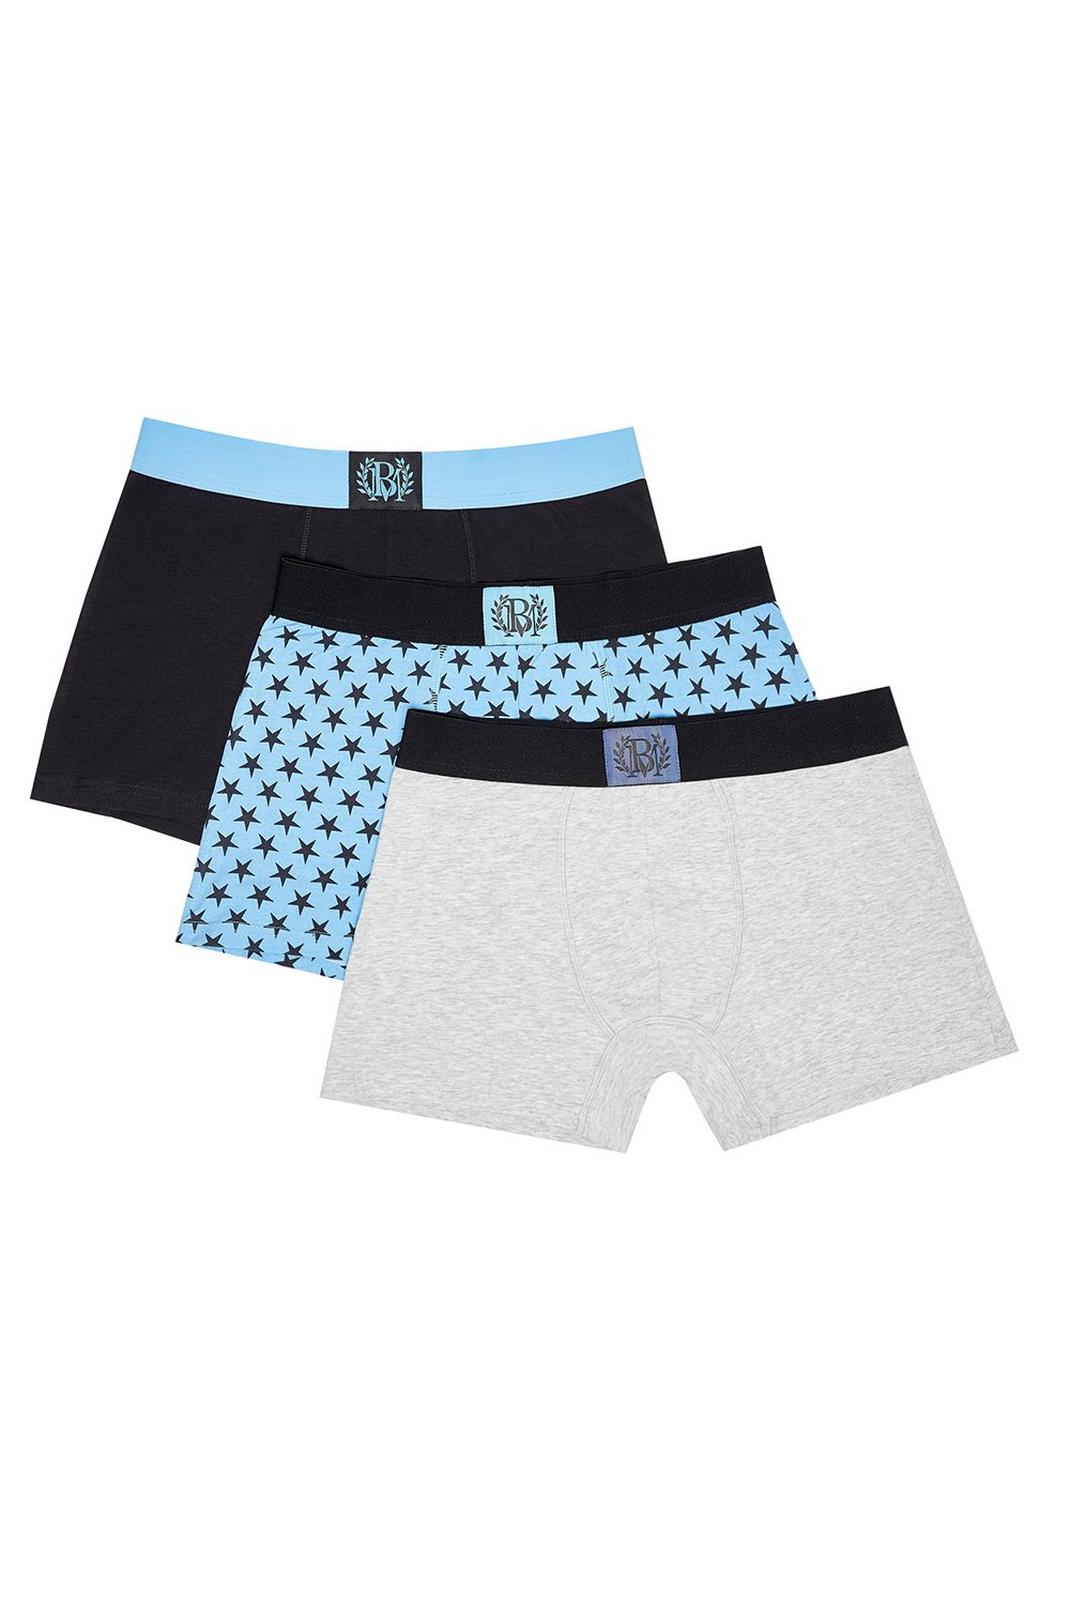 Mid blue 3 Pack Multi Colour Star Themed Trunks image number 1